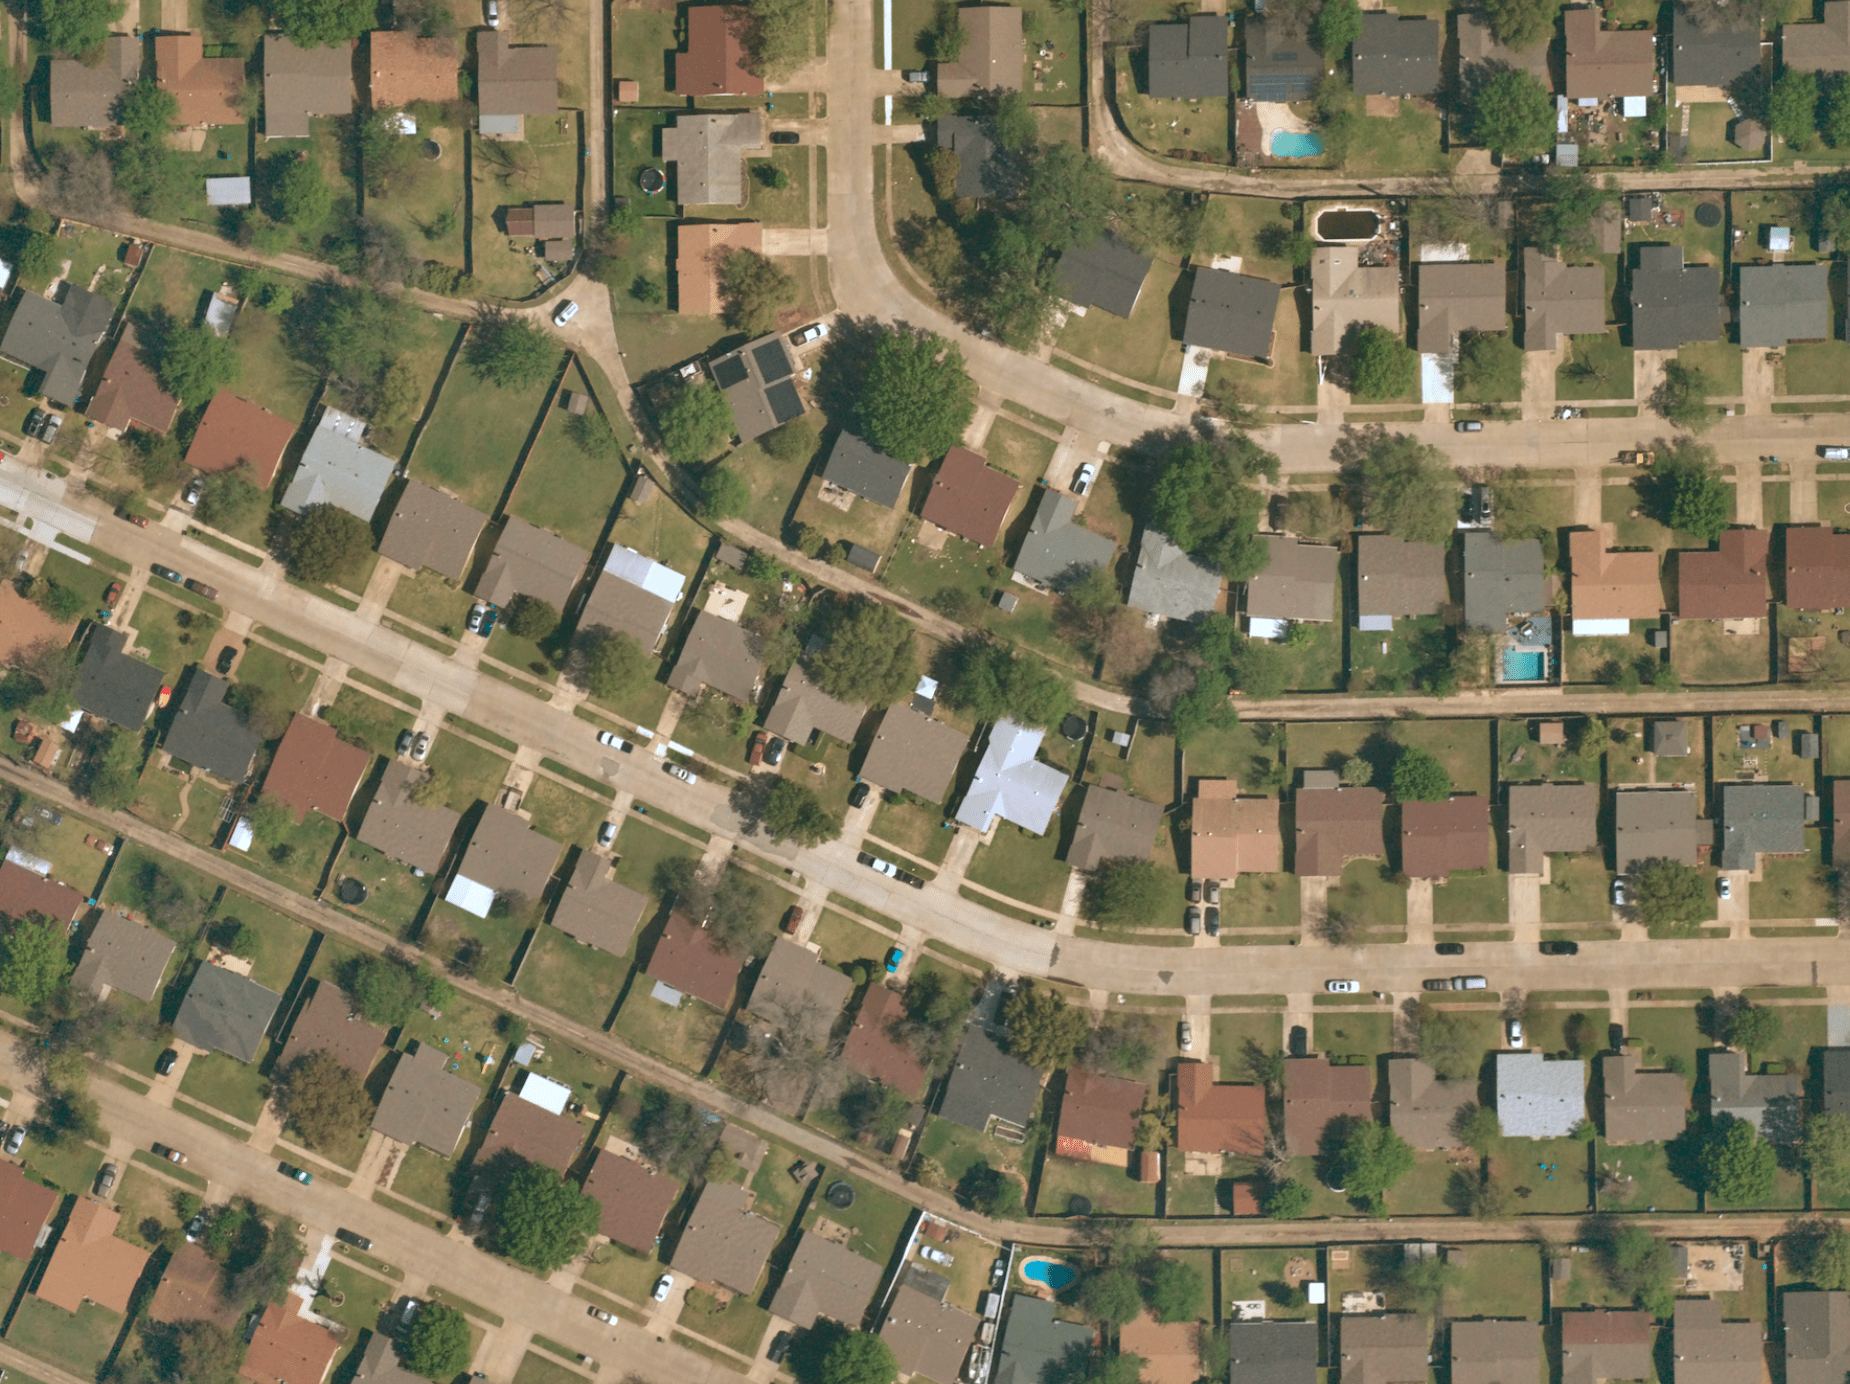 Near Space Labs' 10 cm image of a neighborhood showing property details such as solar panels, swimming pools, and surrounding foliage.